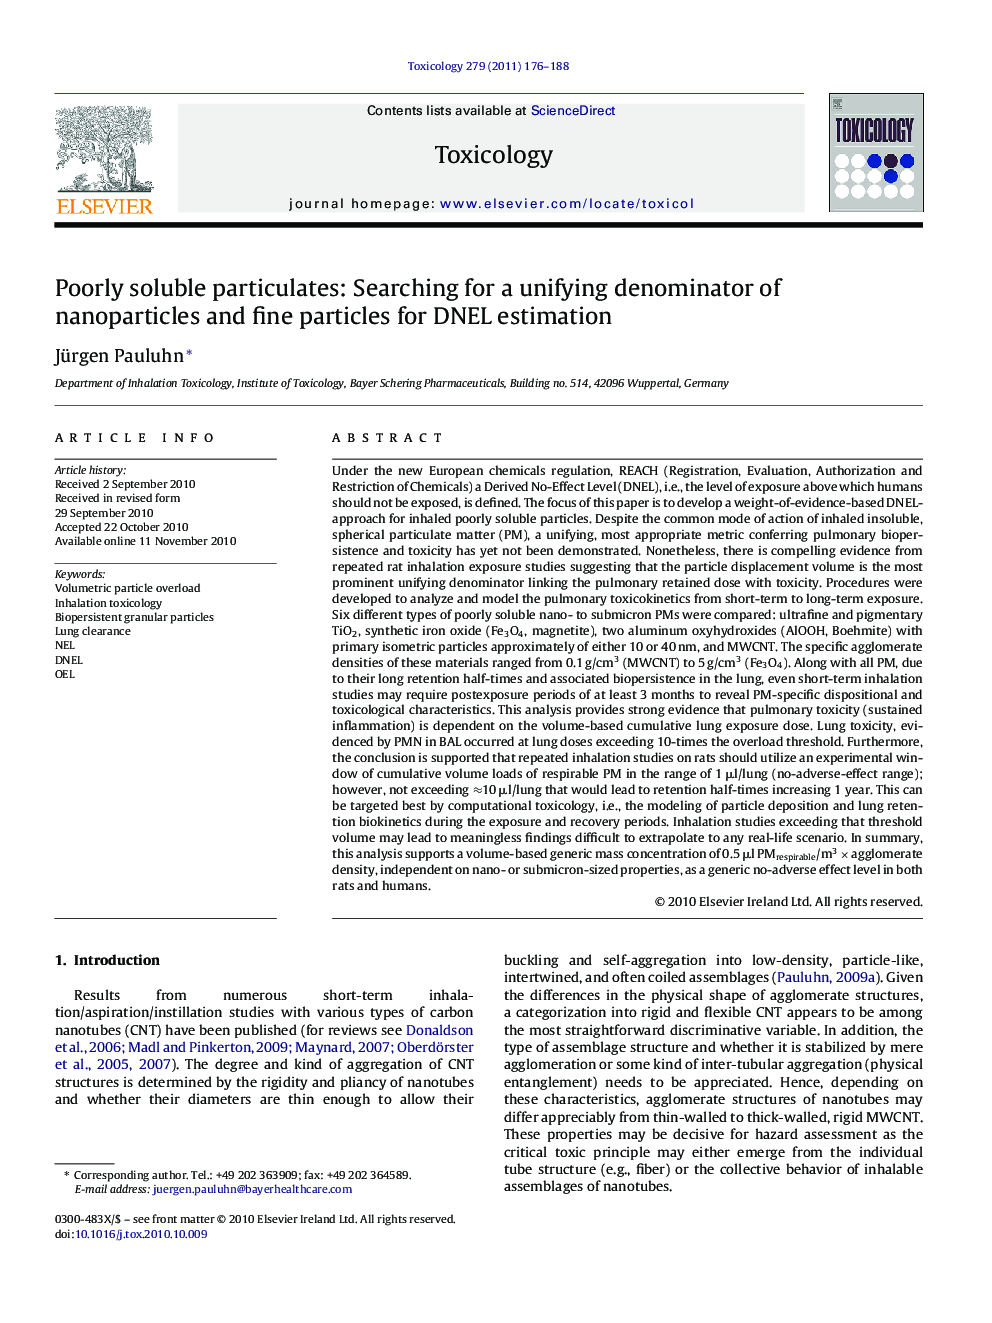 Poorly soluble particulates: Searching for a unifying denominator of nanoparticles and fine particles for DNEL estimation